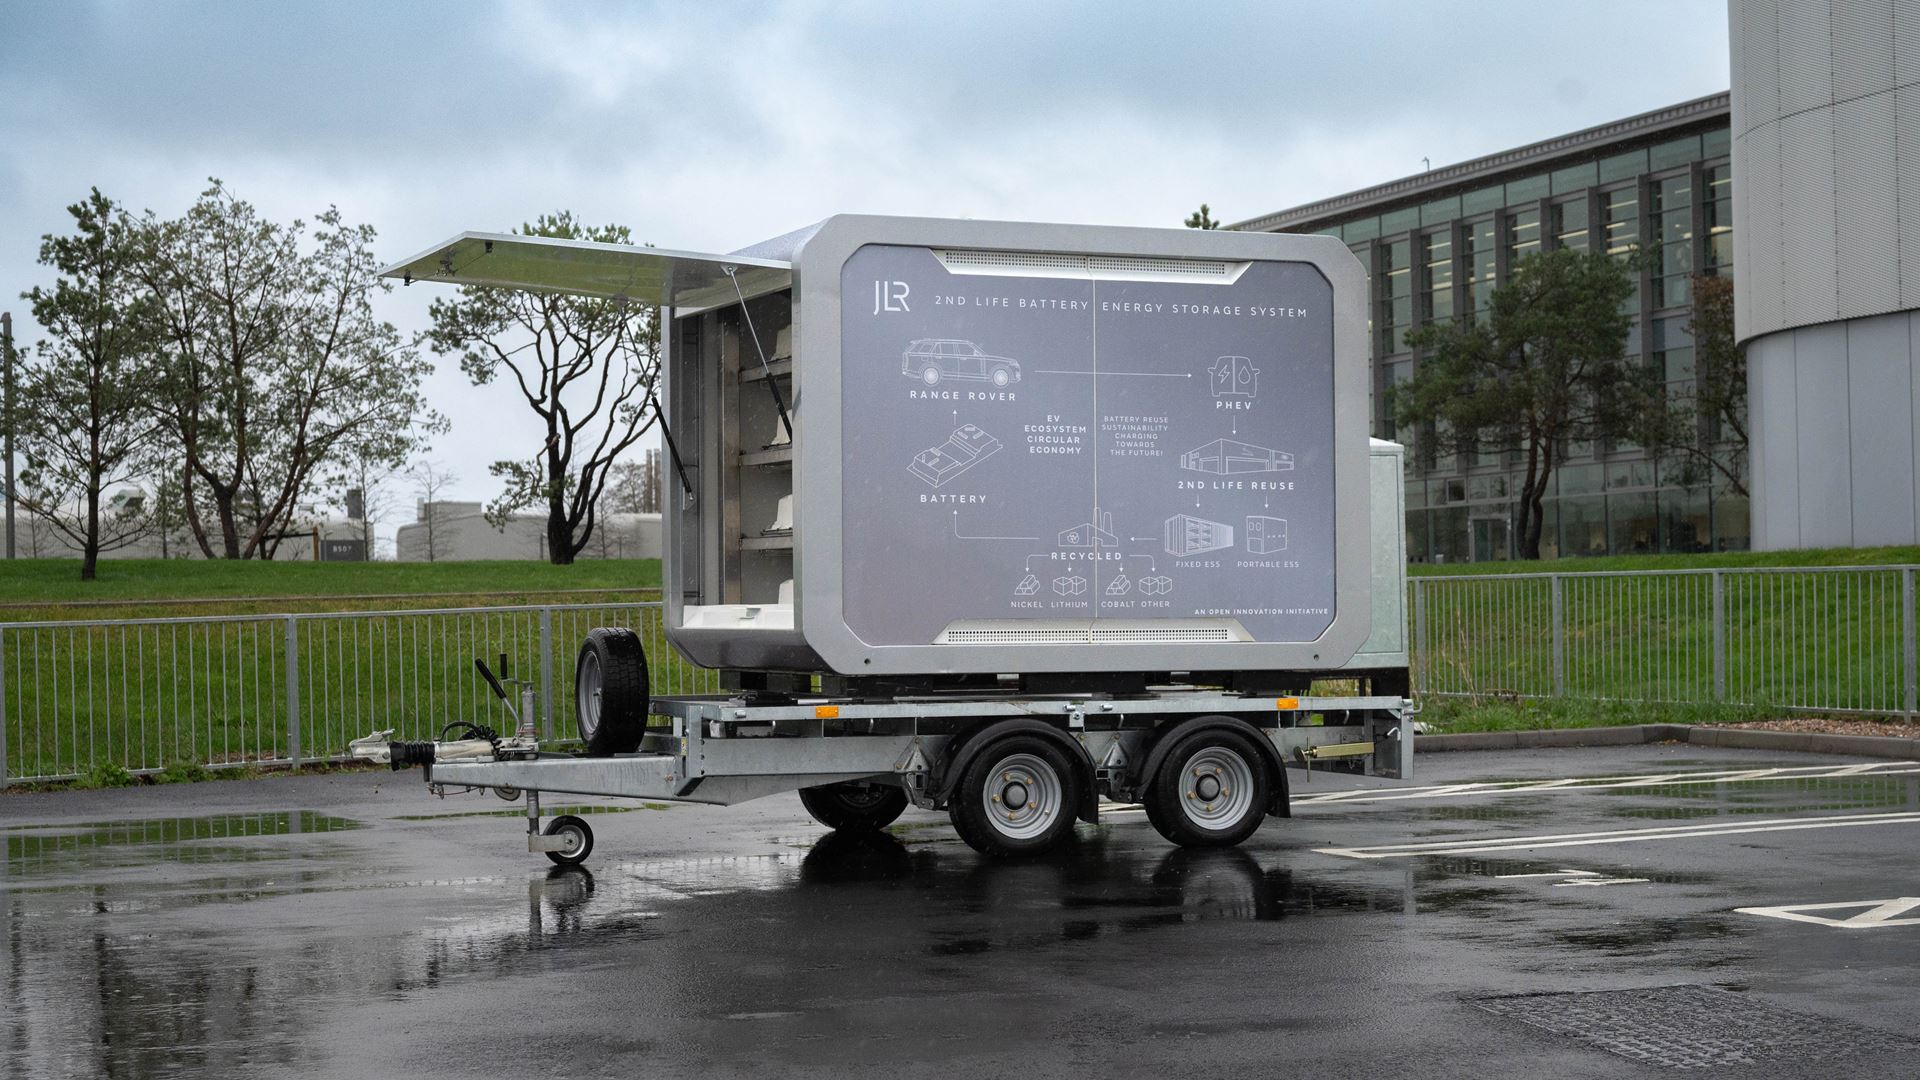 JLR Unveils Portable Battery Energy Storage System Using Second life PHEV Batteries